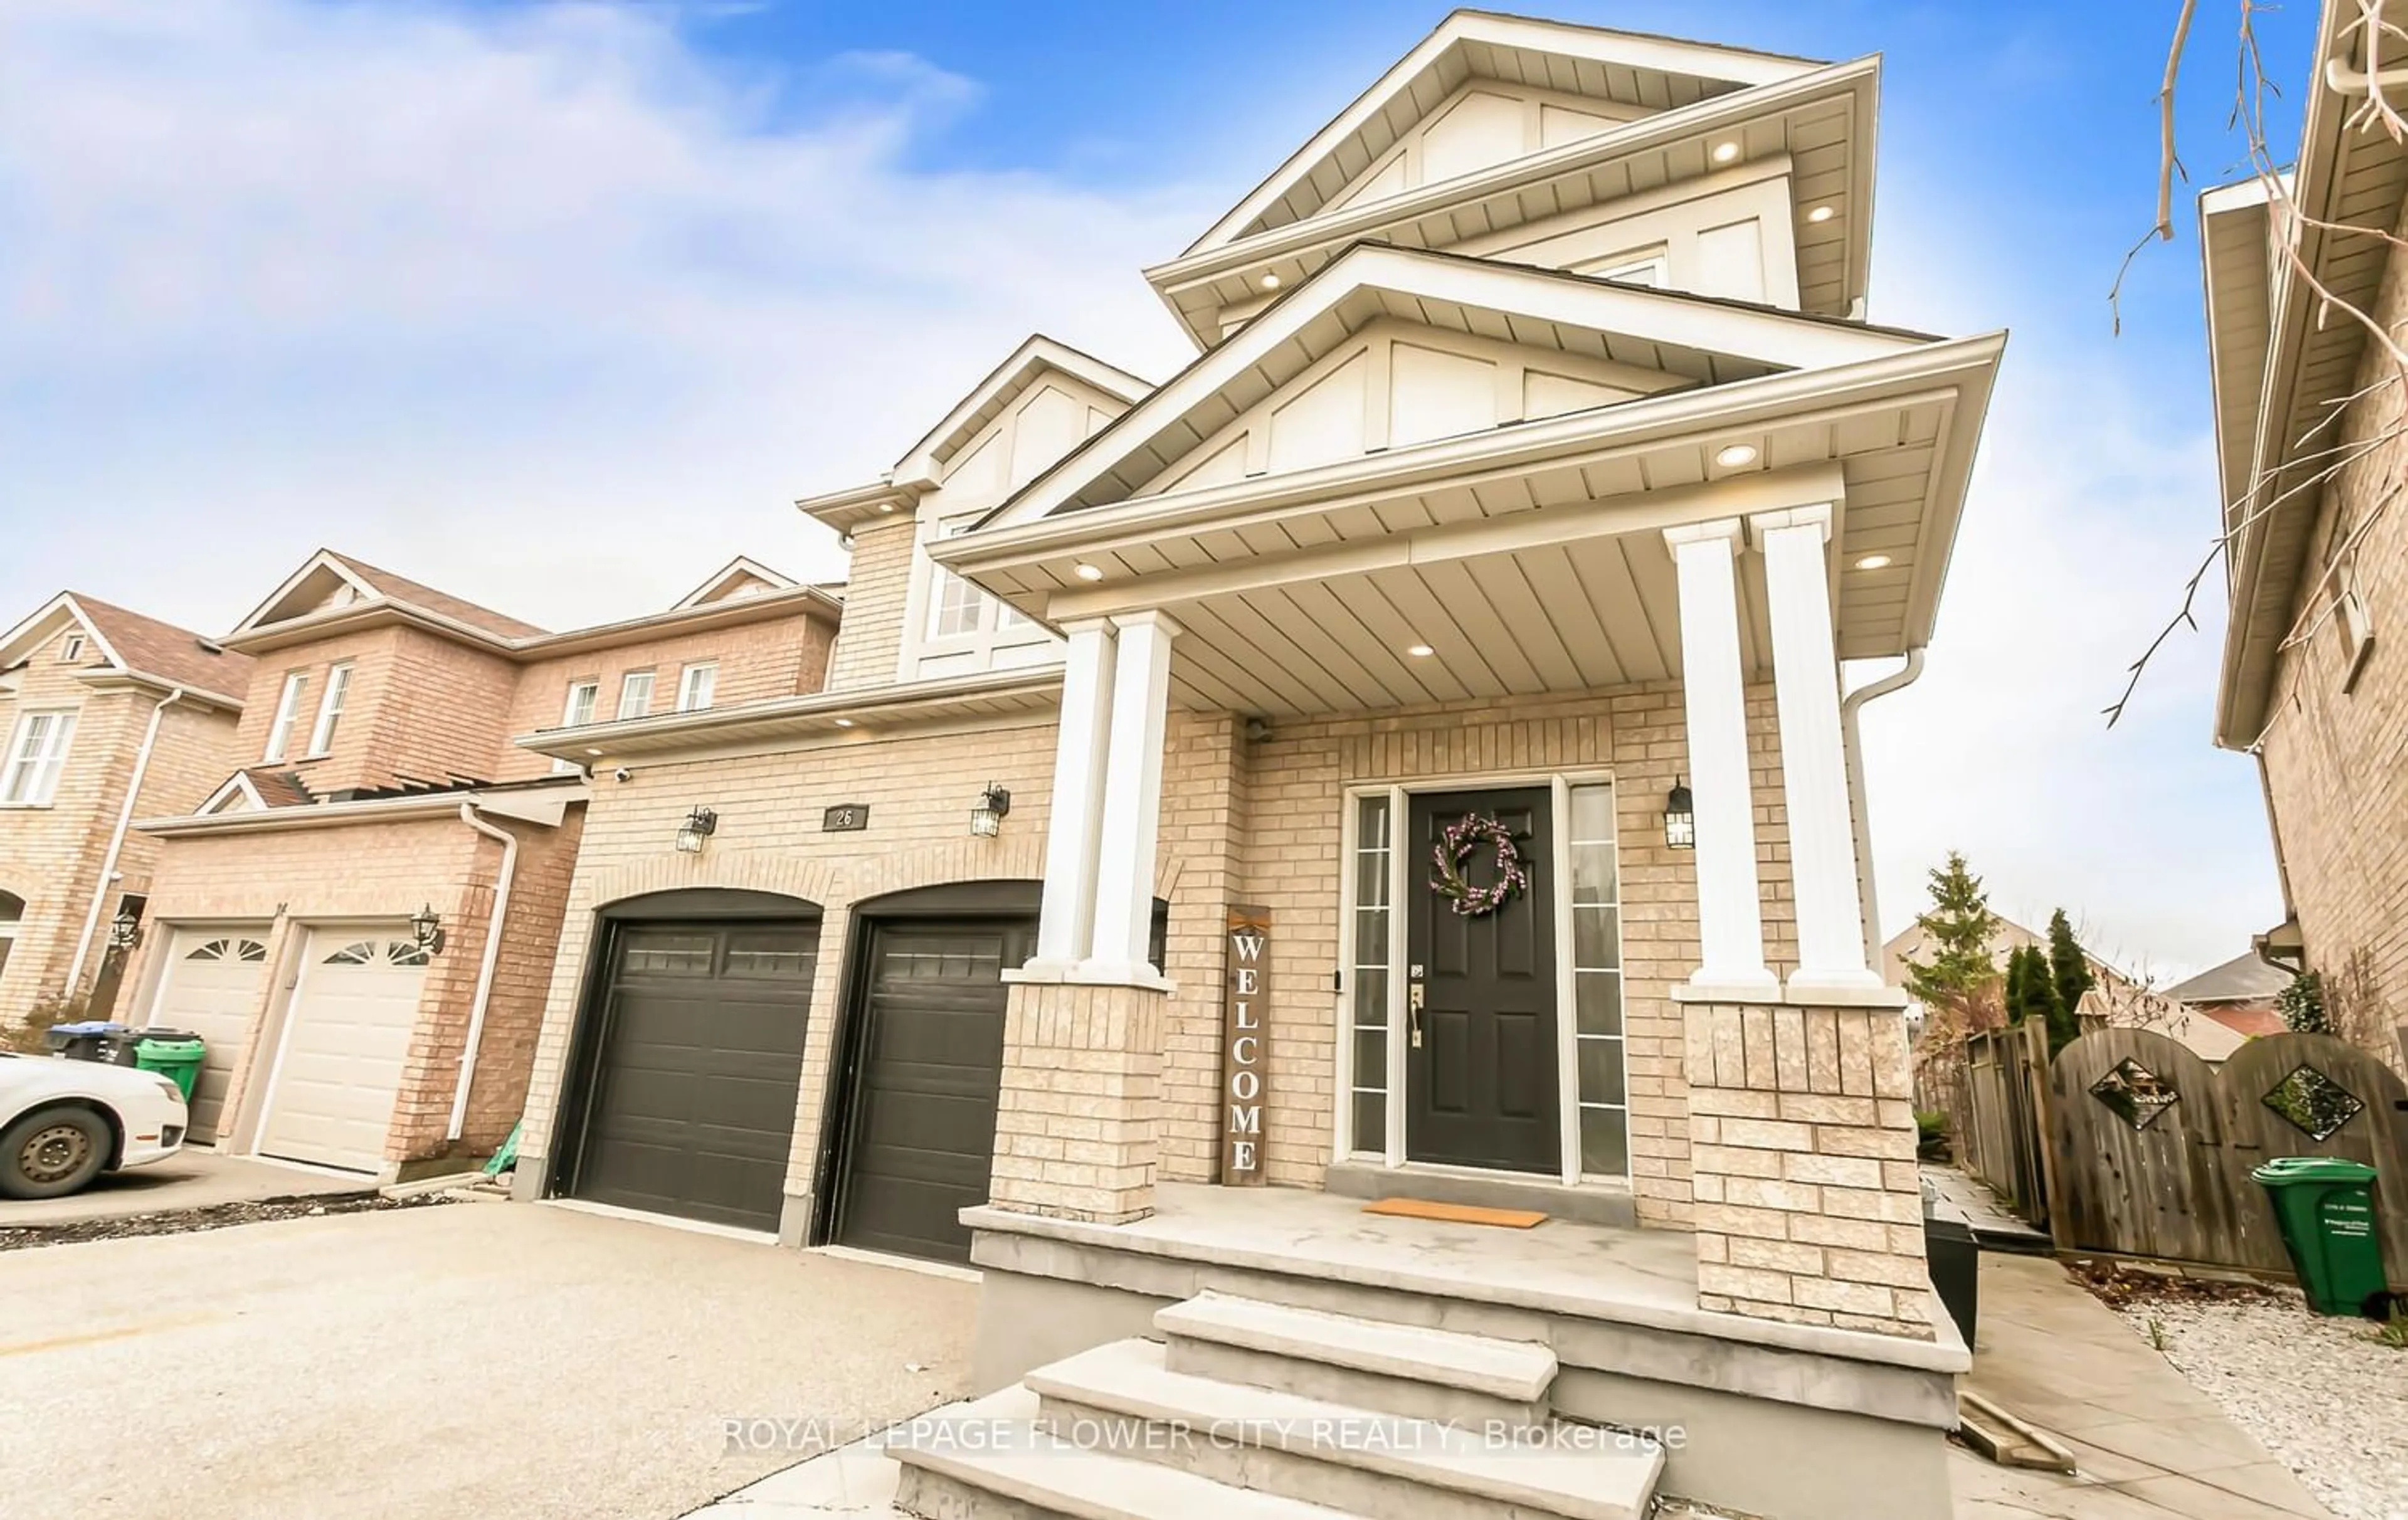 Home with brick exterior material for 26 Calderstone Rd, Brampton Ontario L6P 2A4